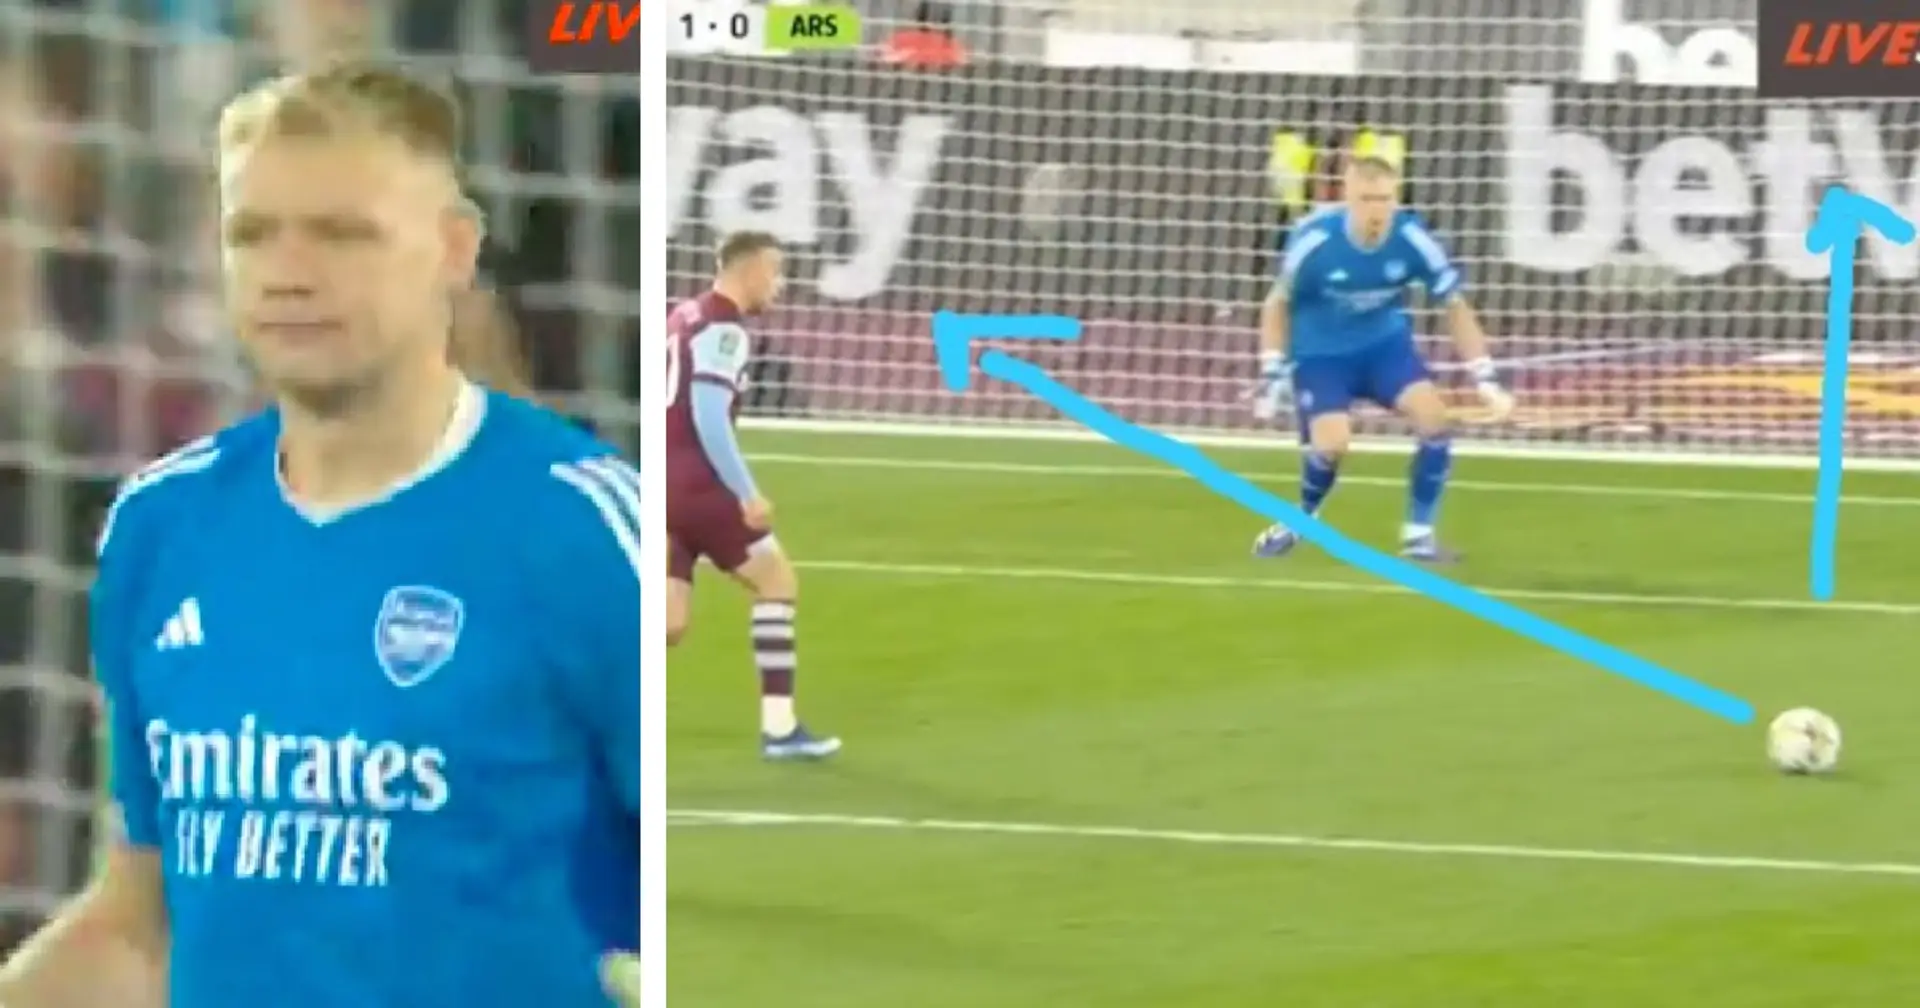 SPOTTED: One key moment Aaron Ramsdale showed his class against West Ham